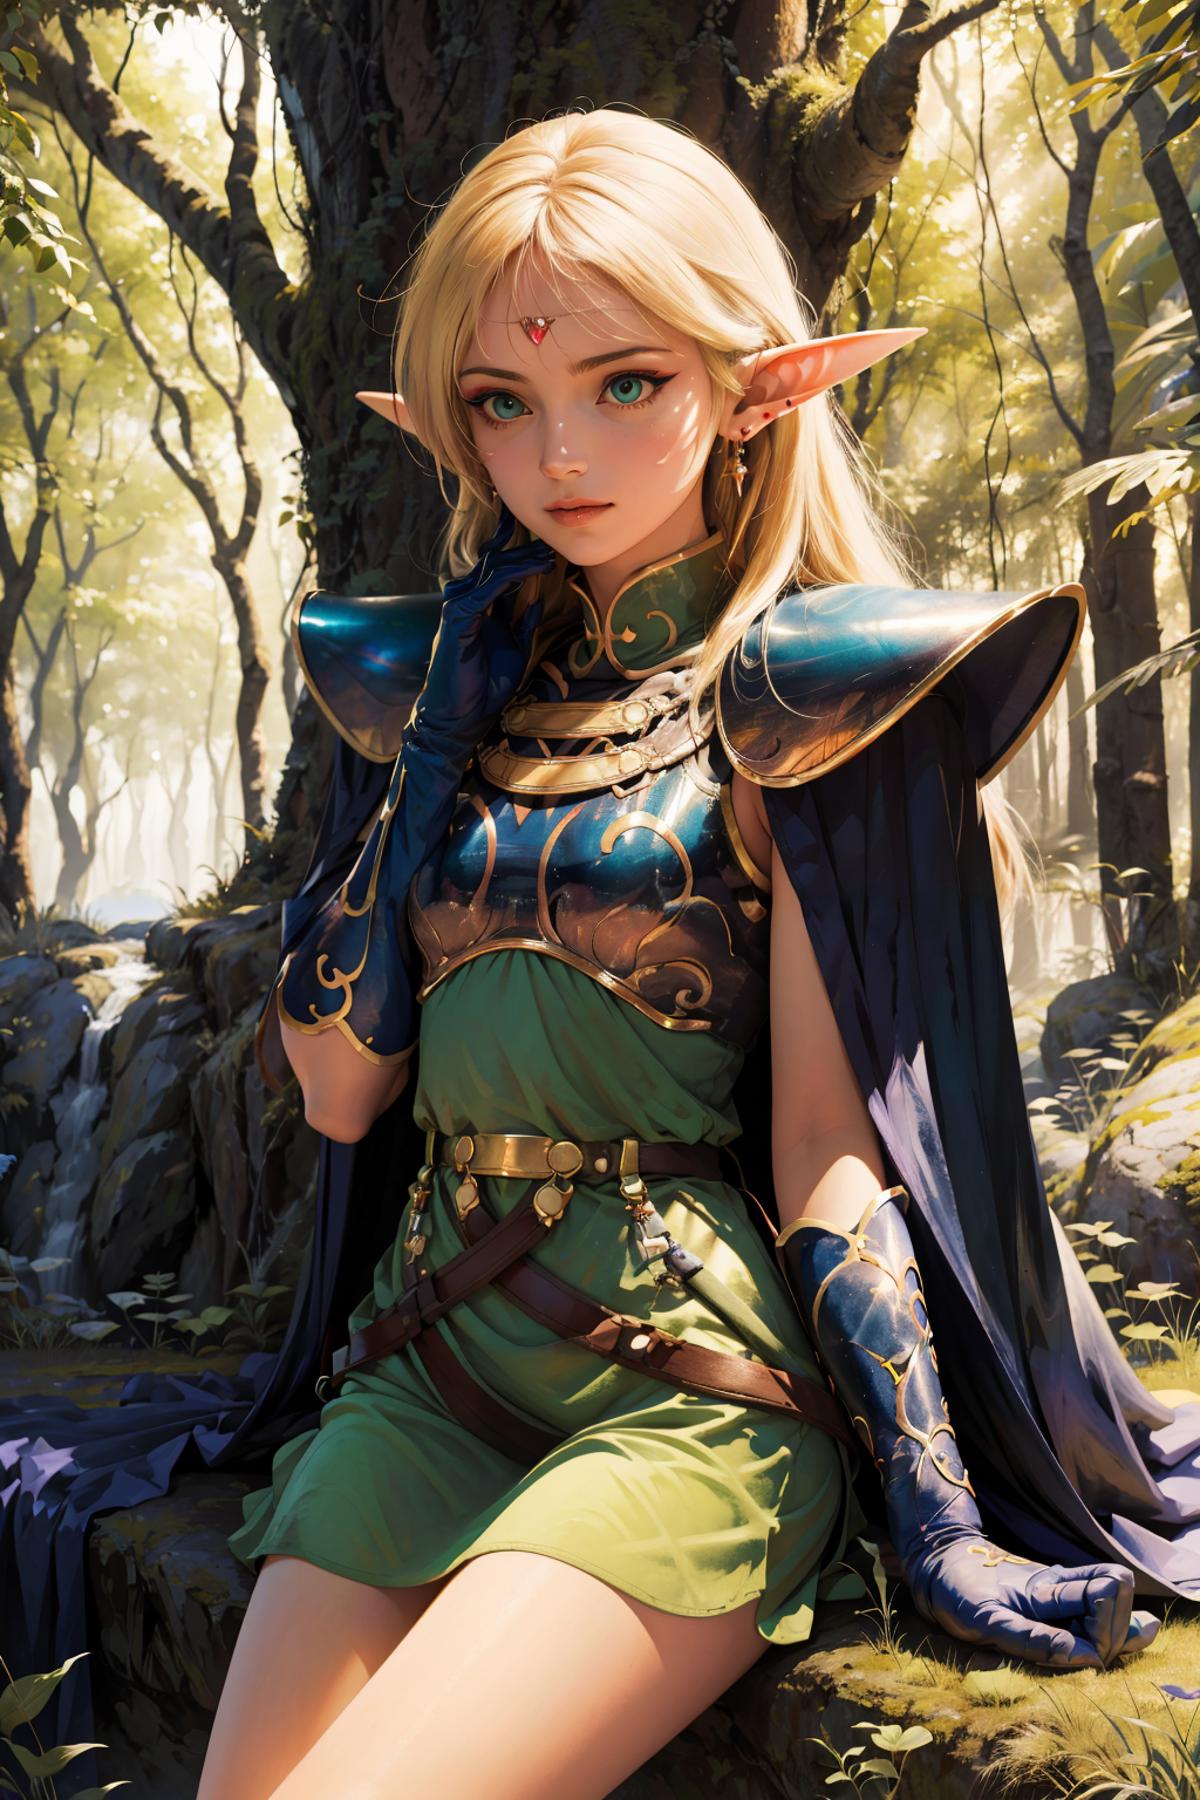 A beautifully drawn illustration of a female elf in a green dress.